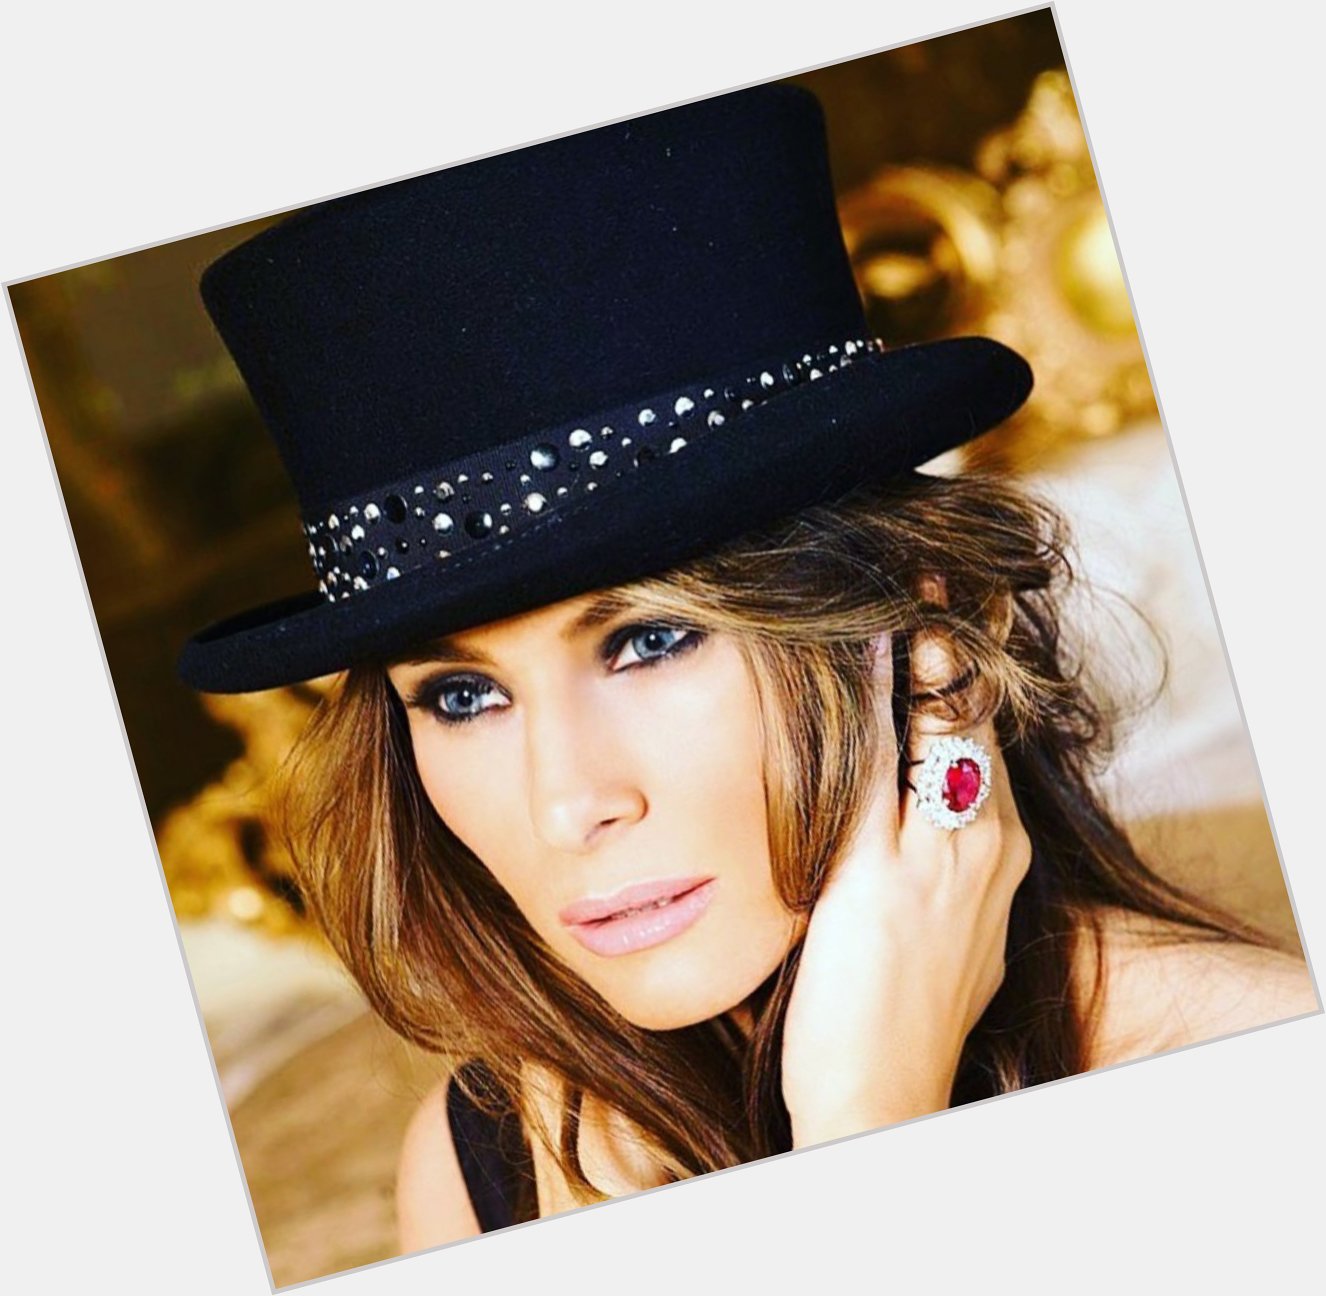 HAPPY BIRTHDAY TO MELANIA TRUMP!!!   The most beautiful First Lady in the history of our country! Be best! 